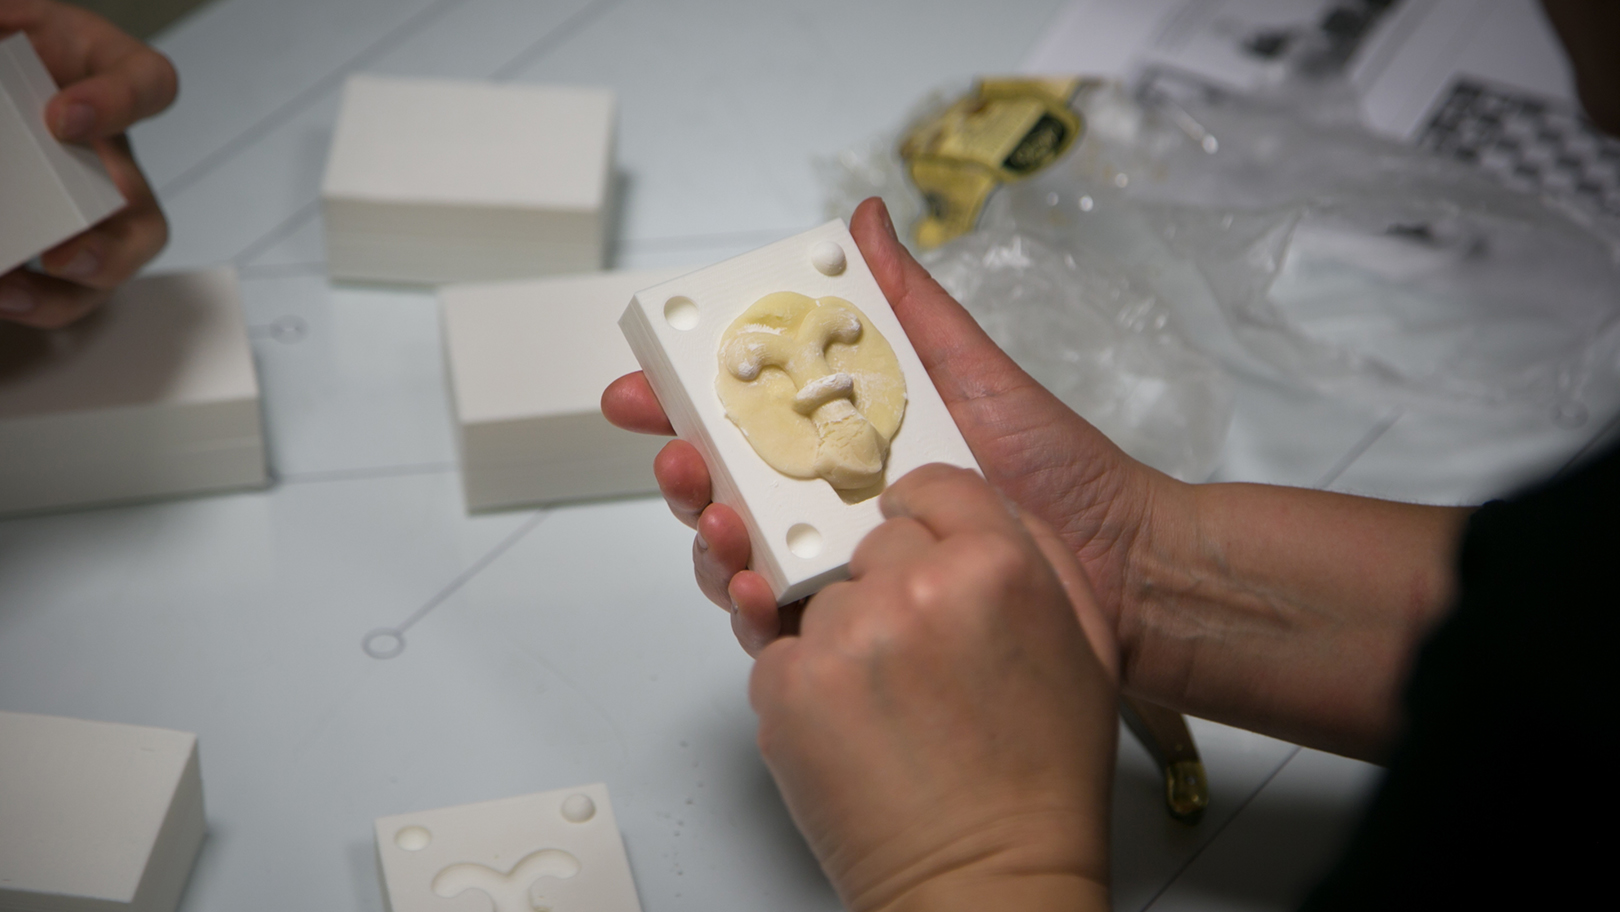 MARZIPAN CHESS FIGURE MANUFACTURING WITH THE HELP OF 3D TECHNOLOGIES